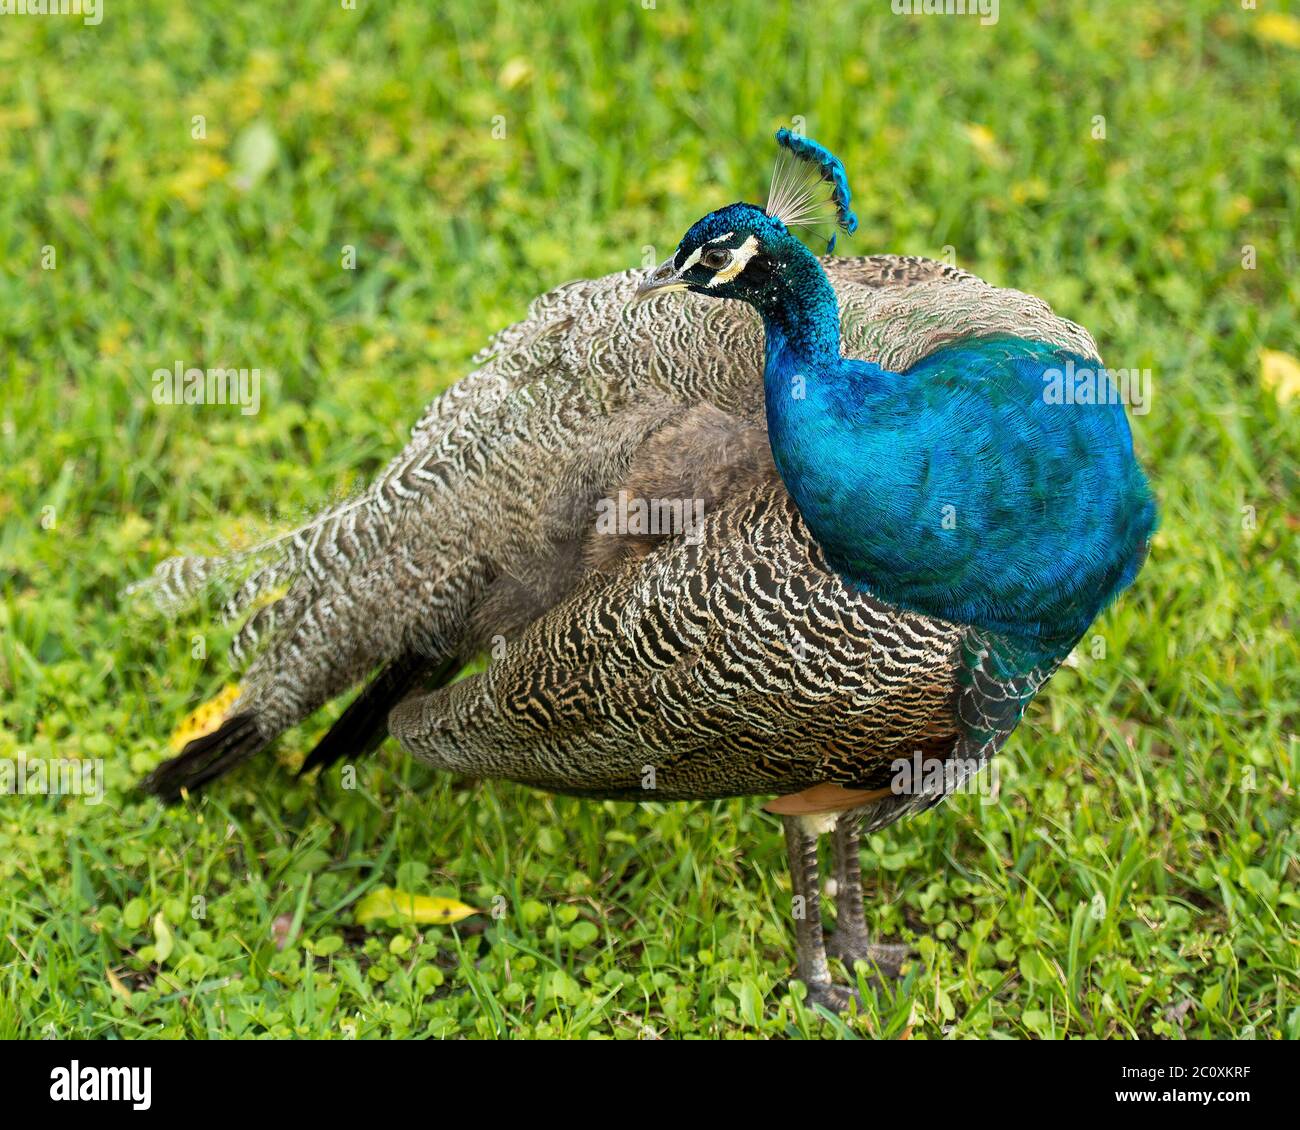 Peacock bird, the beautiful colourful bird standing on grass in its environment and surrounding displaying beautiful colourful feathers plumage. Stock Photo